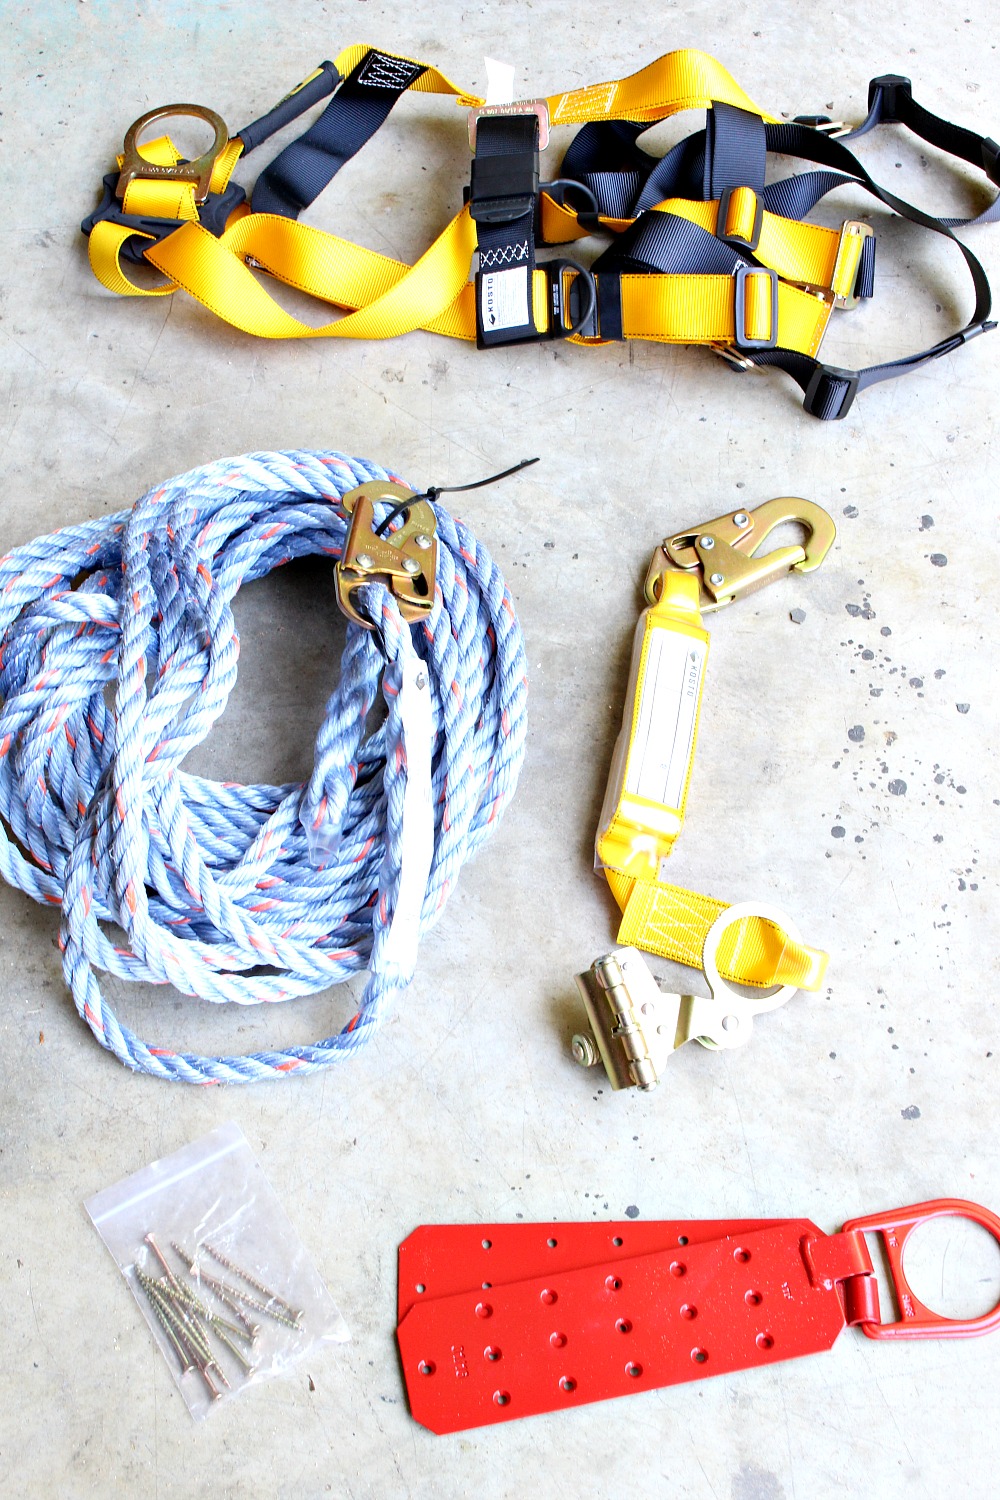 Roofer Safety Kit Review